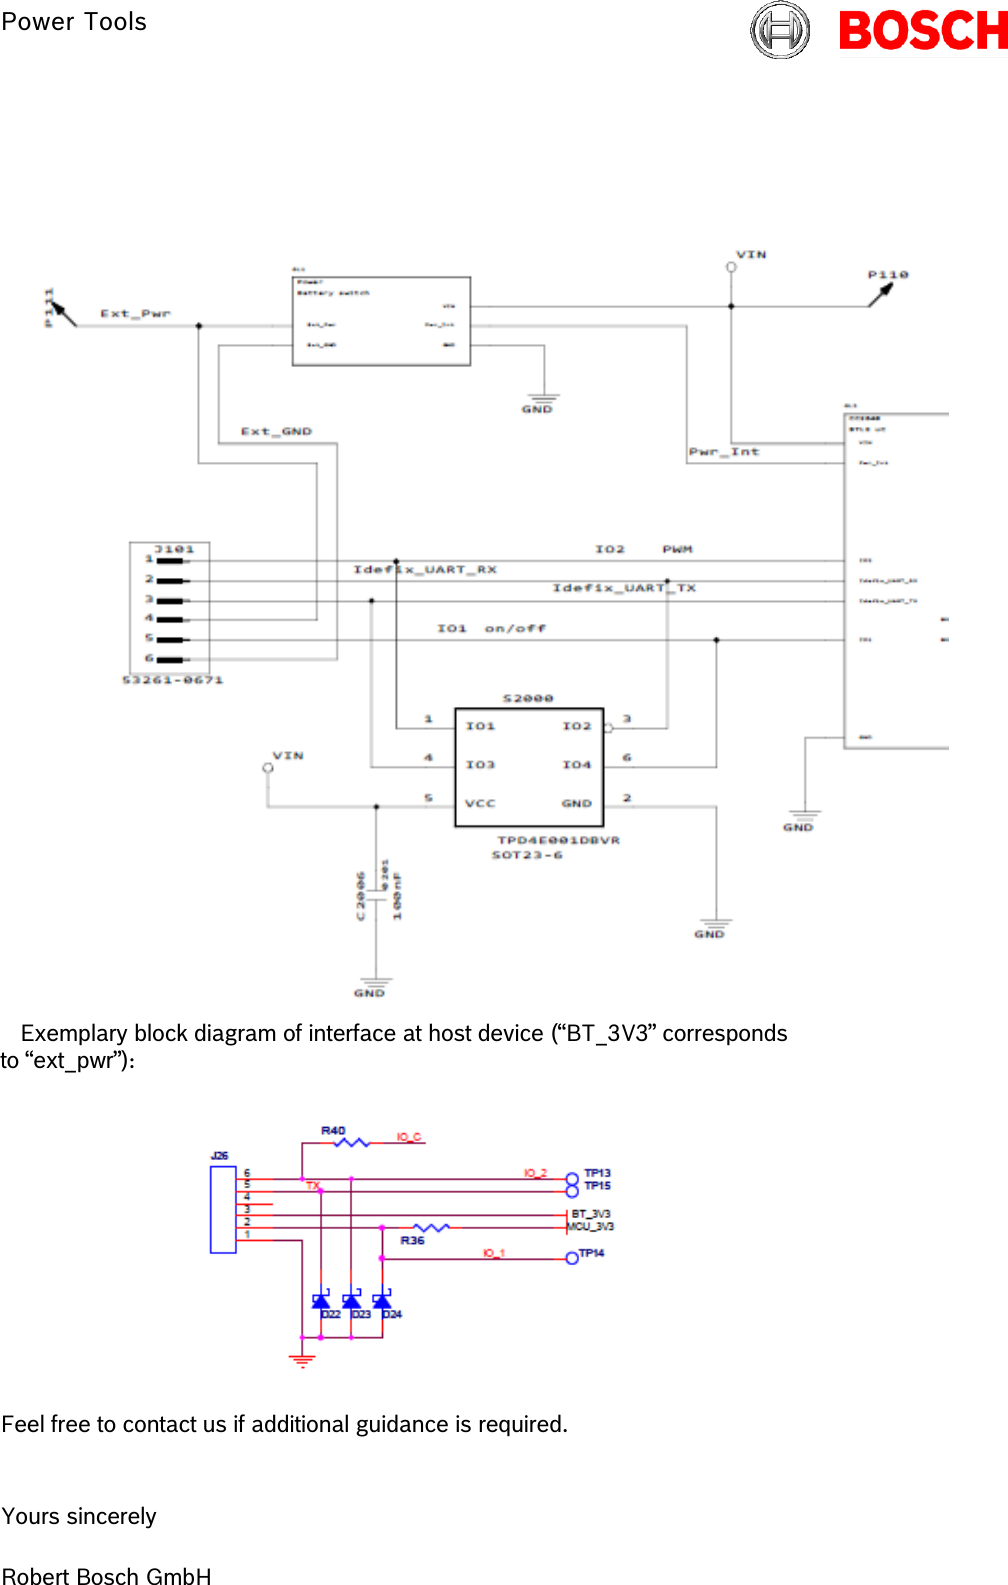      Power Tools                   22 June 2016 Page 4 of 5      Exemplary block diagram of interface at host device (“BT_3V3” corresponds to “ext_pwr”):  Feel free to contact us if additional guidance is required.   Yours sincerely  Robert Bosch GmbH 